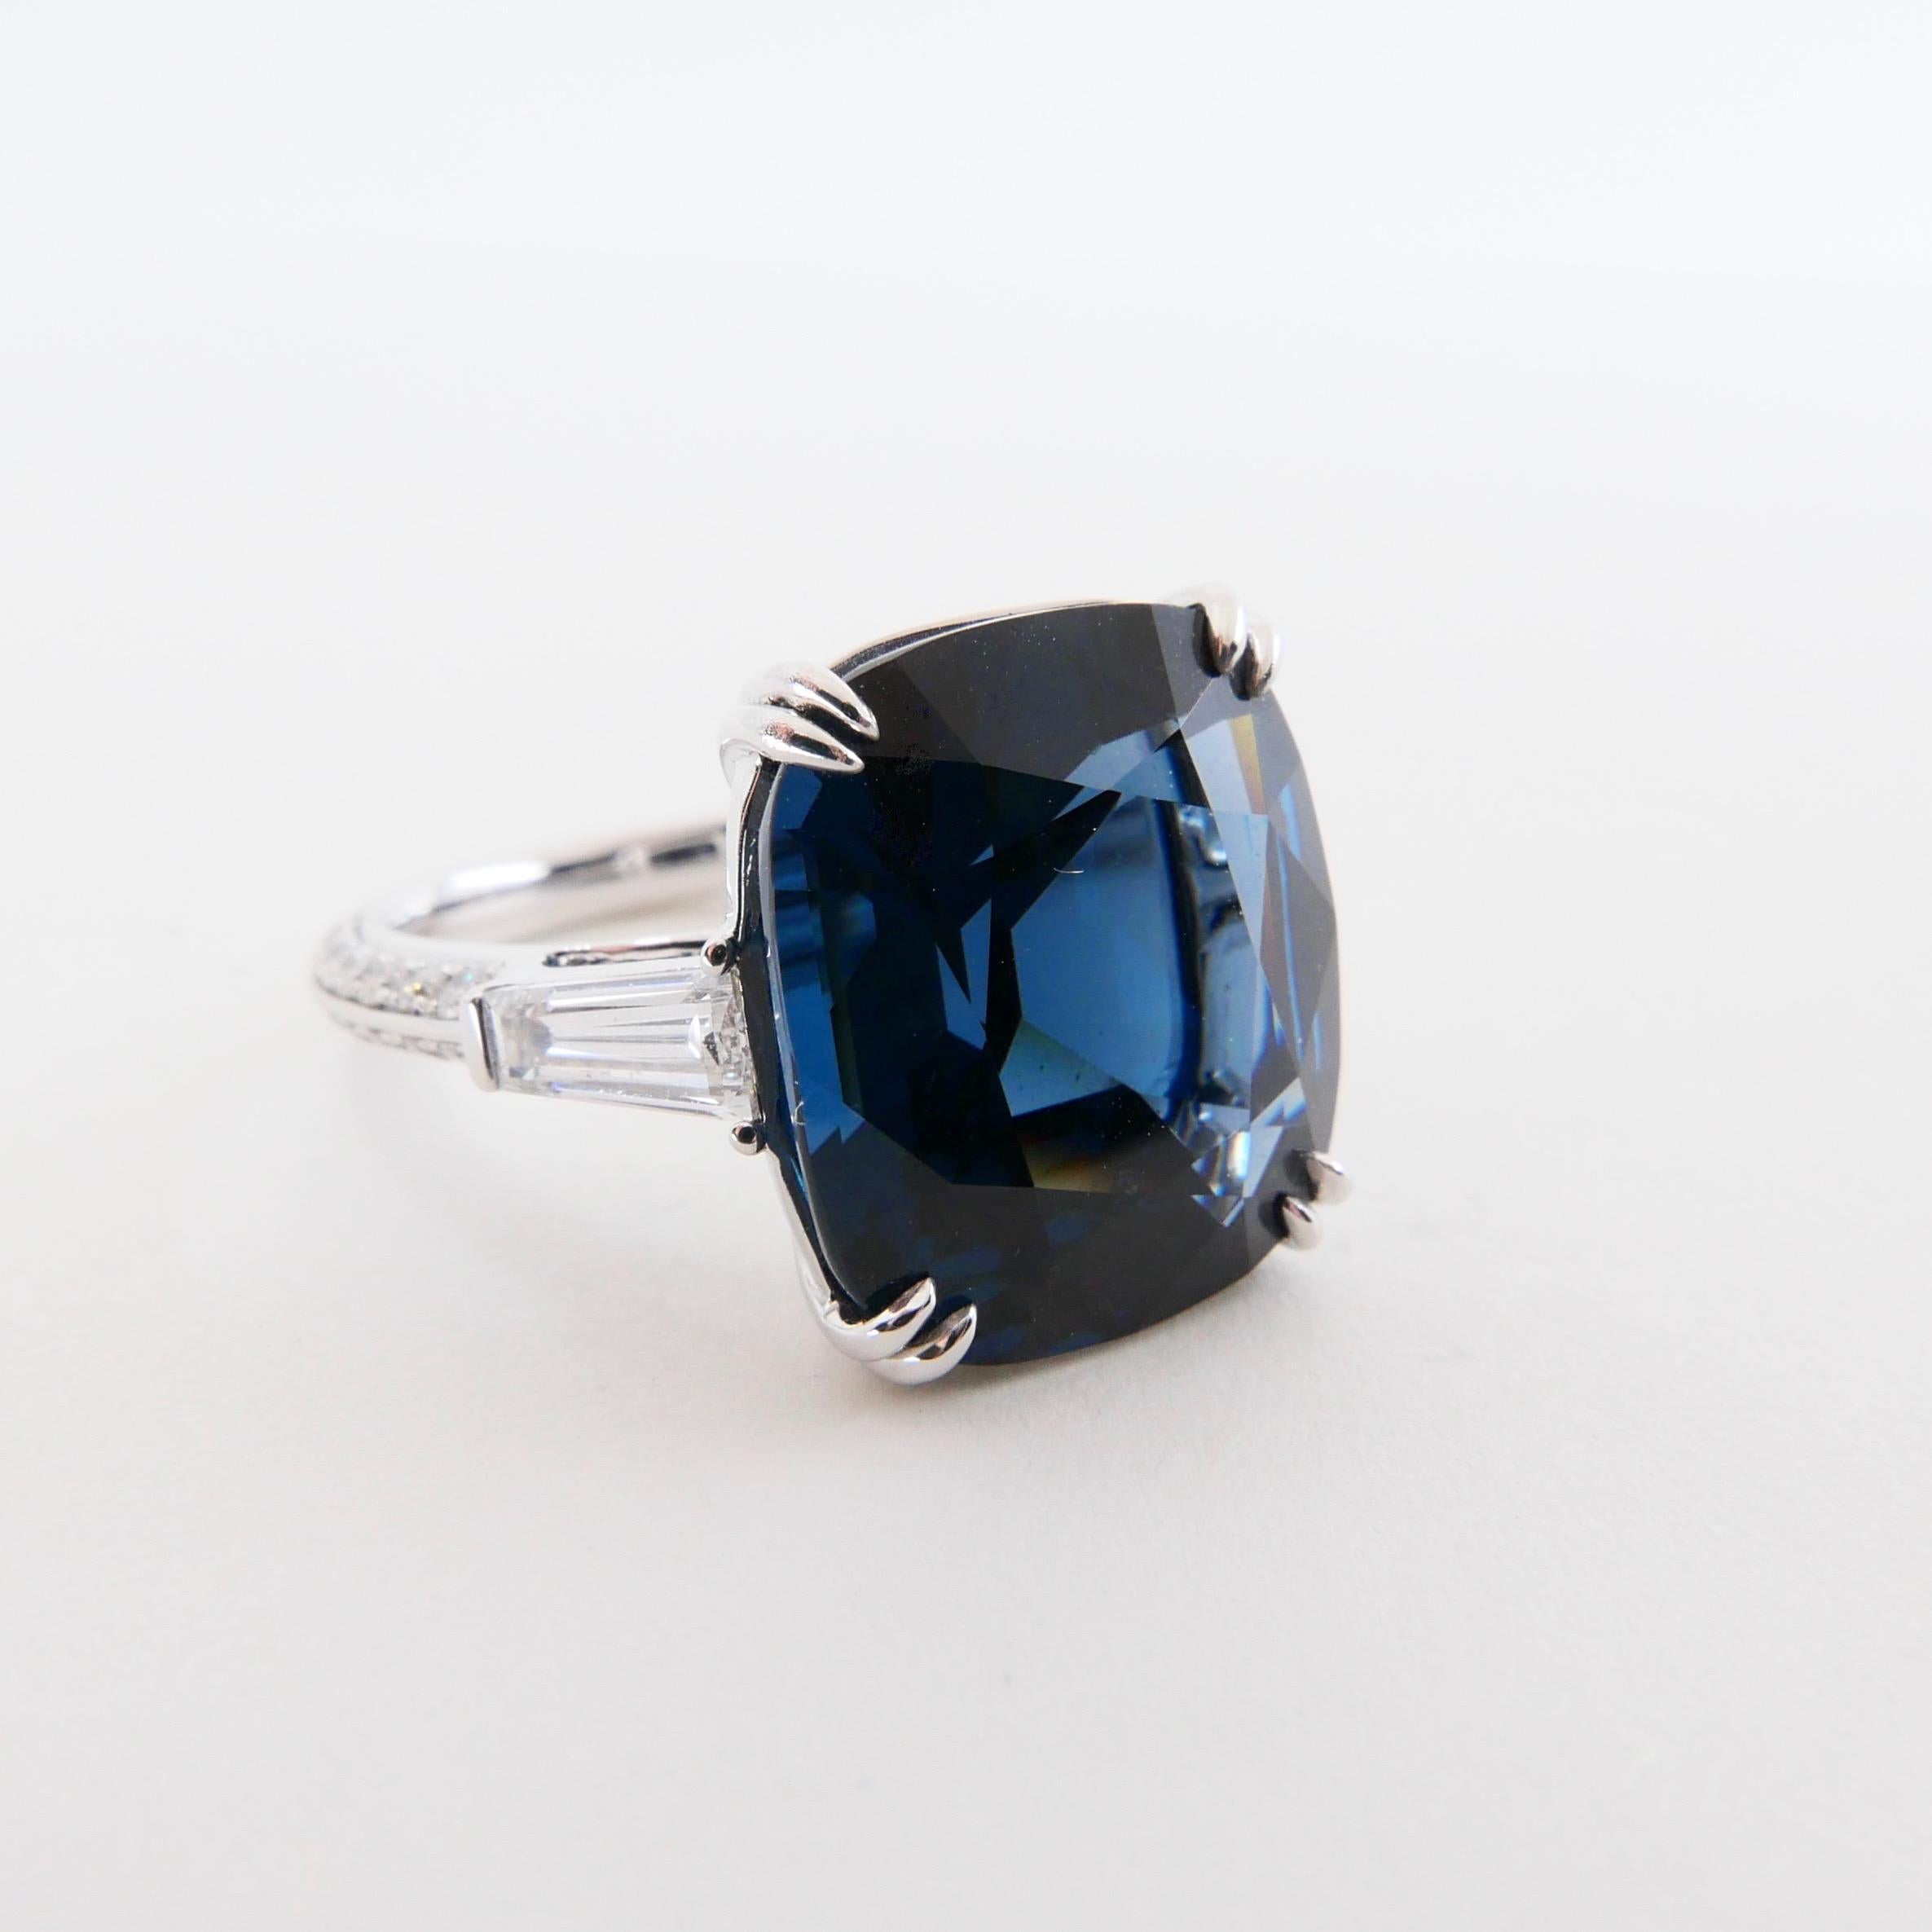 Cushion Cut Important Certified 10.10 Carat Cobalt Spinel Diamond Cocktail Ring. Exquisite.